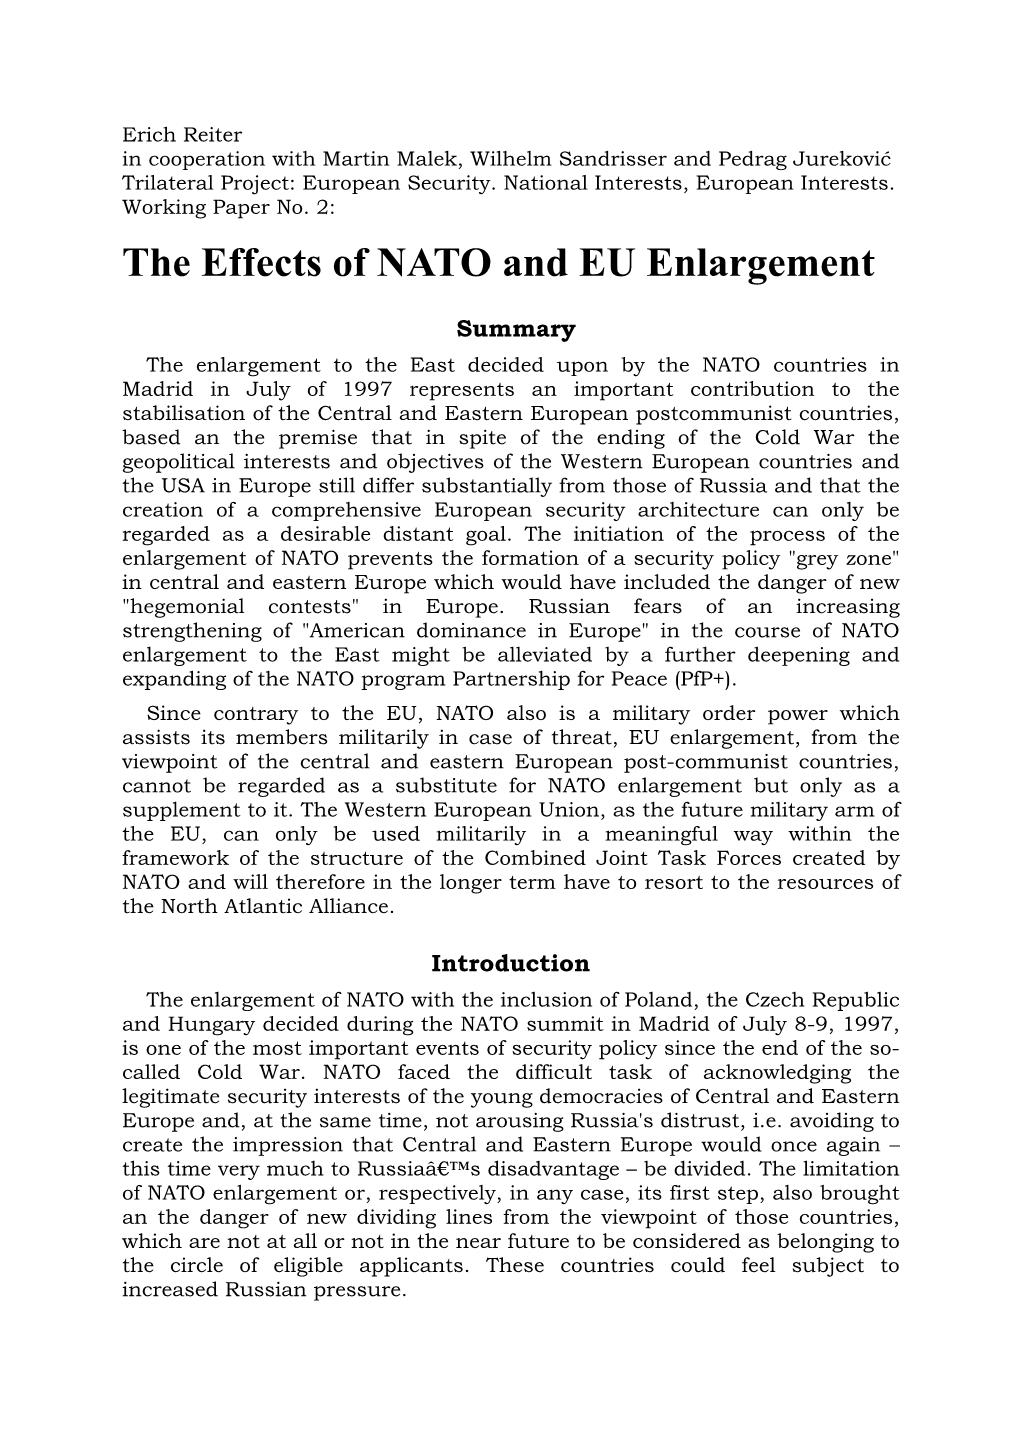 The Effects of NATO and EU Enlargement